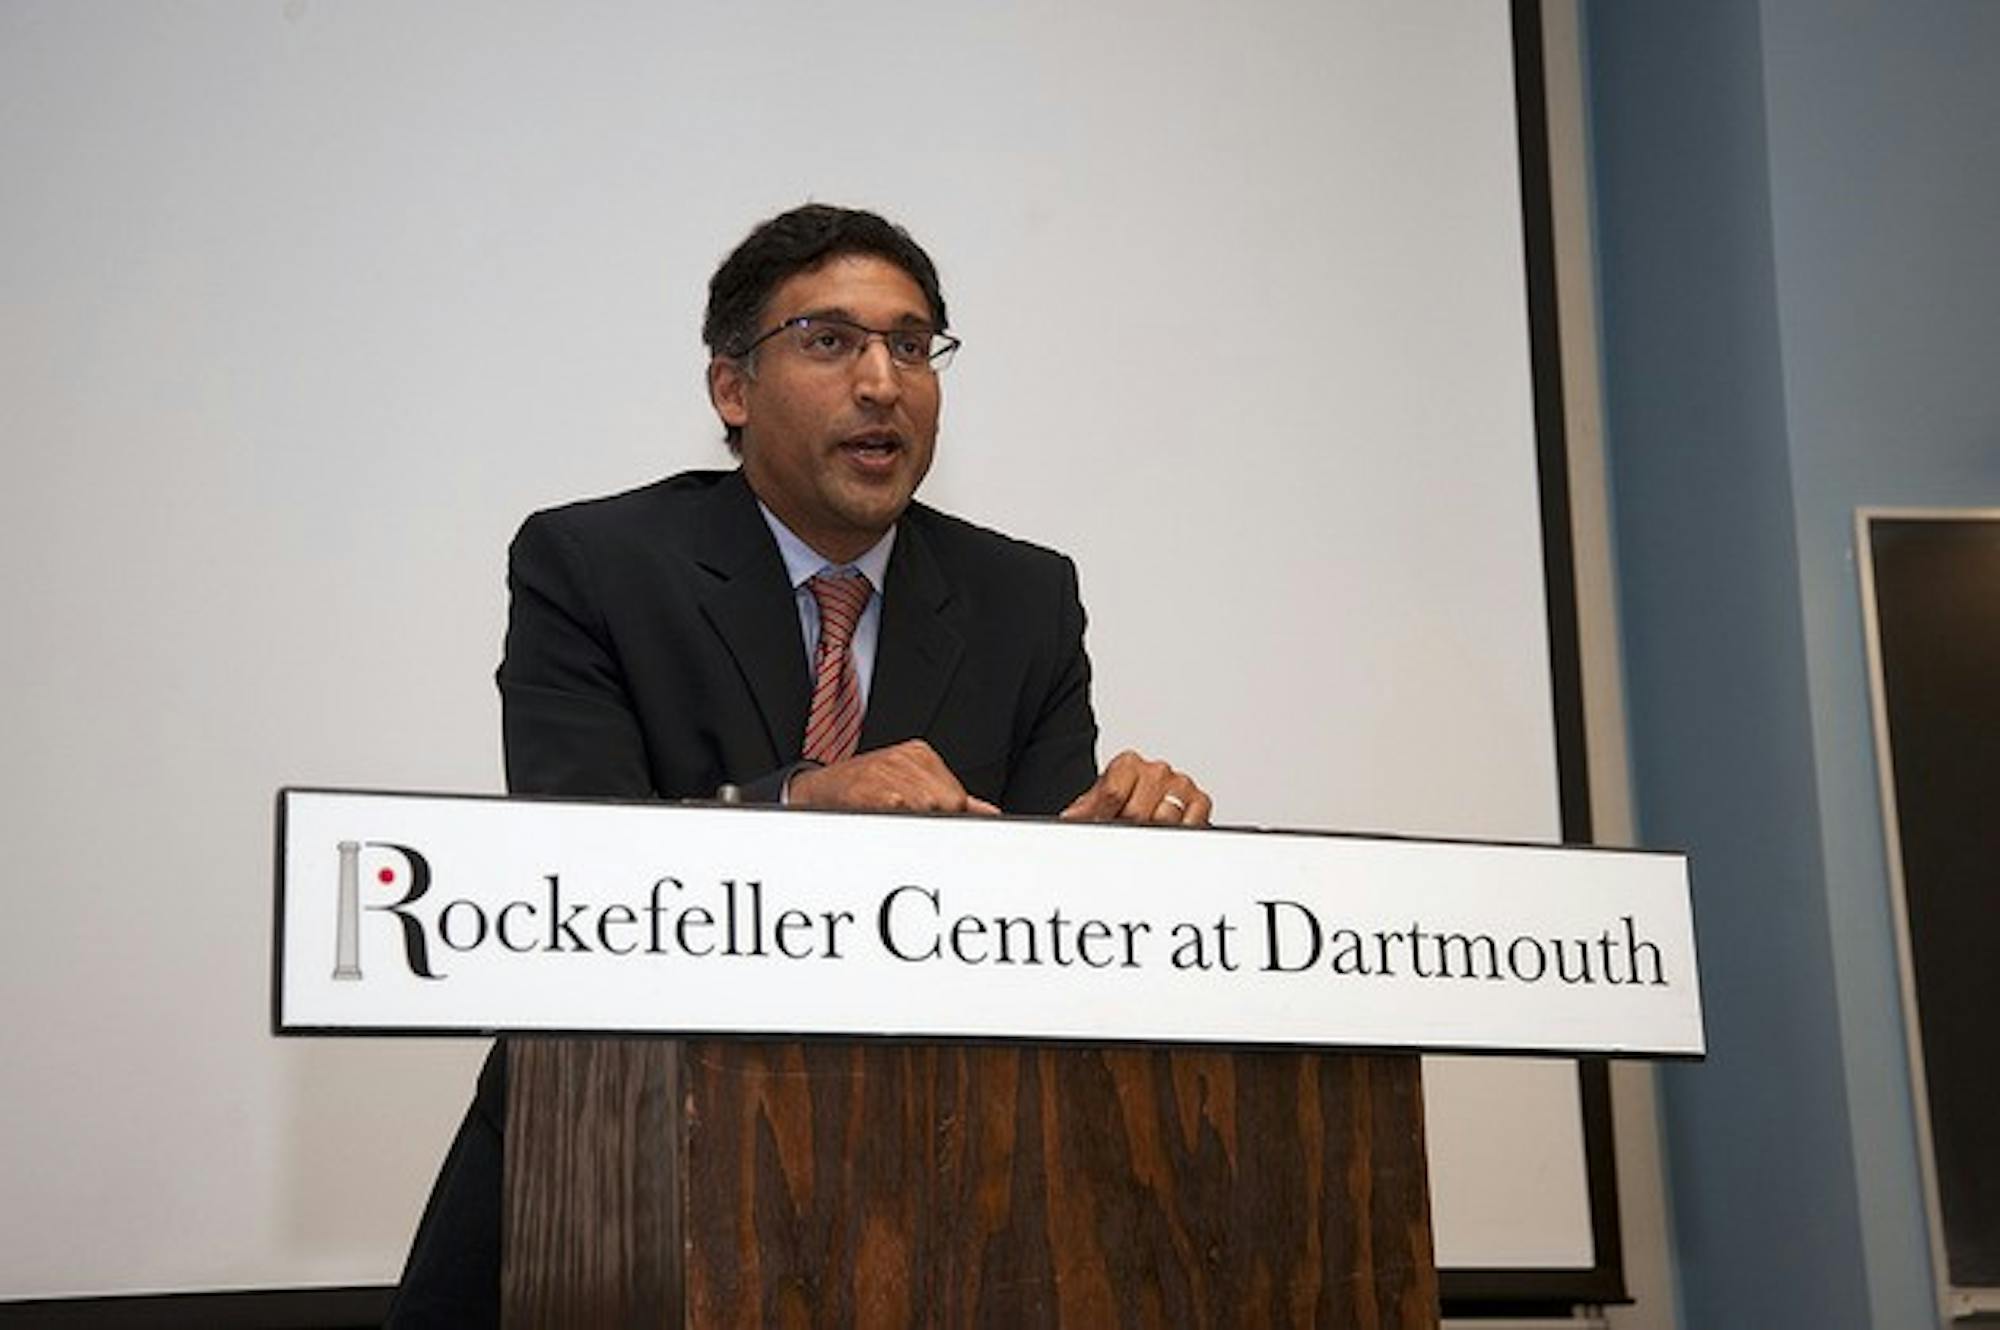 Former Acting Solicitor General Neal Katyal '91 discussed the historical role of the solicitor general in federal court cases in a Monday lecture.